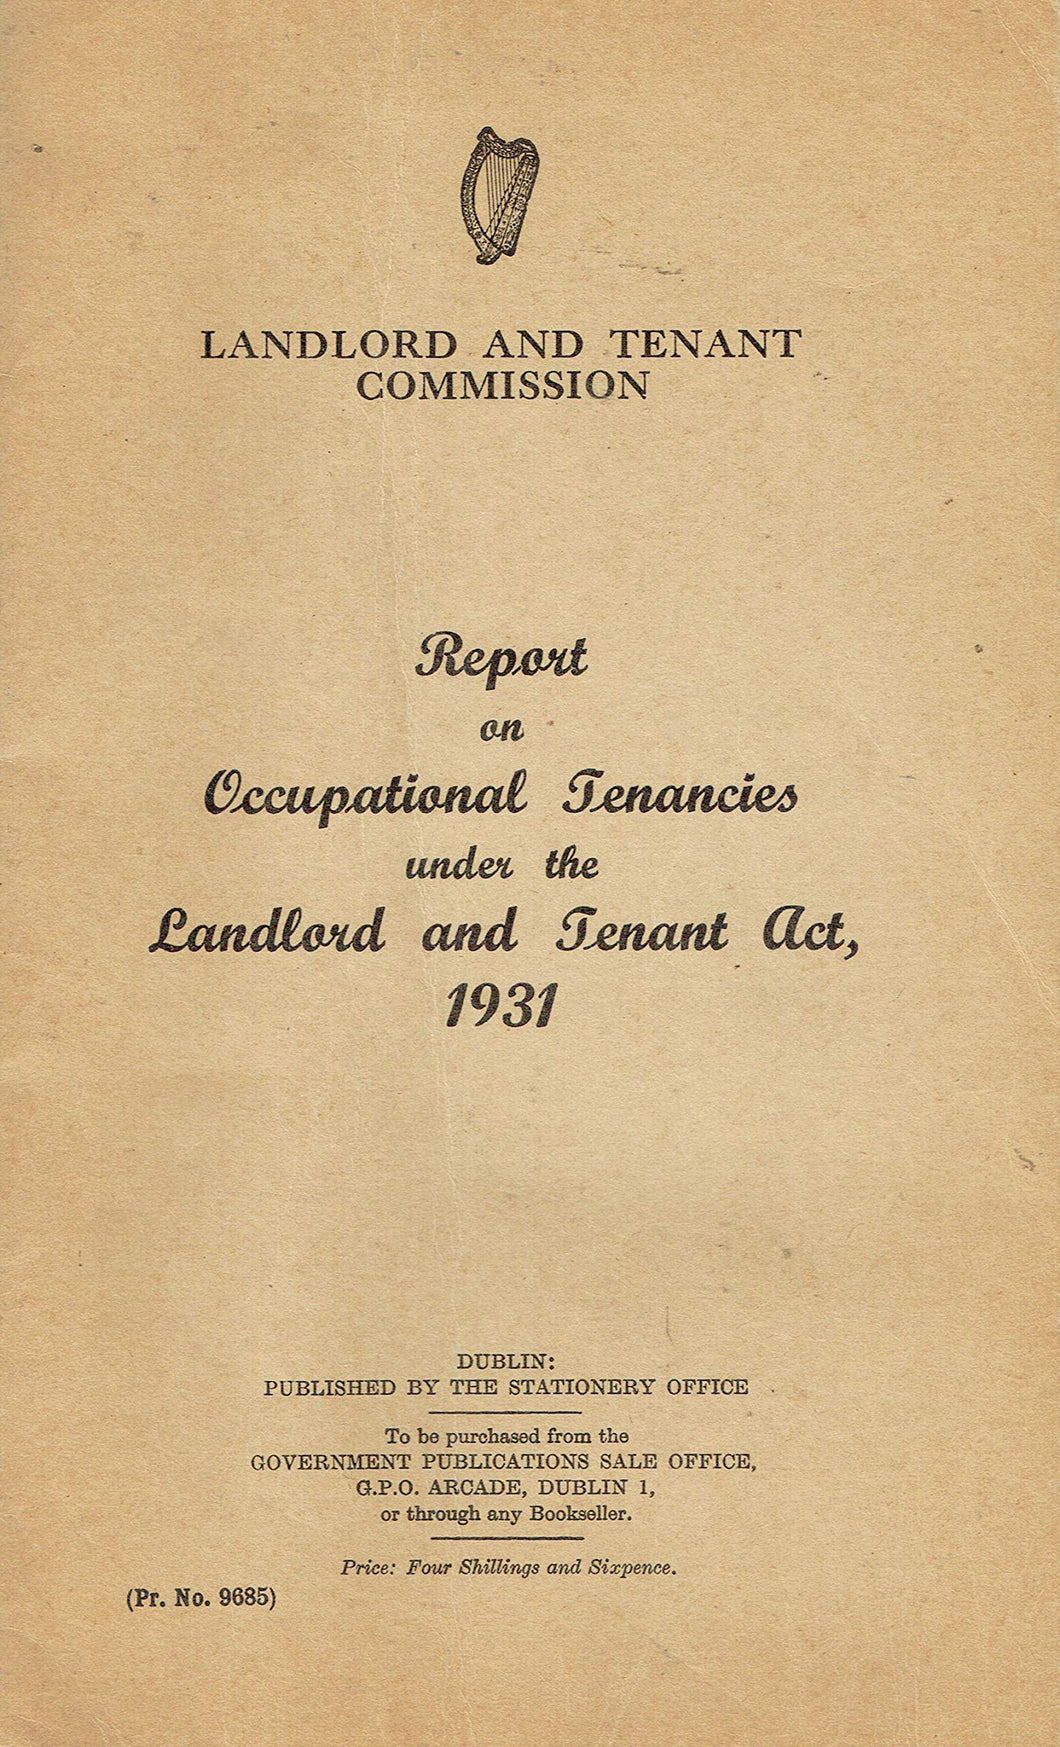 Landlord and Tenant Commission: Report on Occupational Tenancies under the Landlord and Tenant Act, 1931